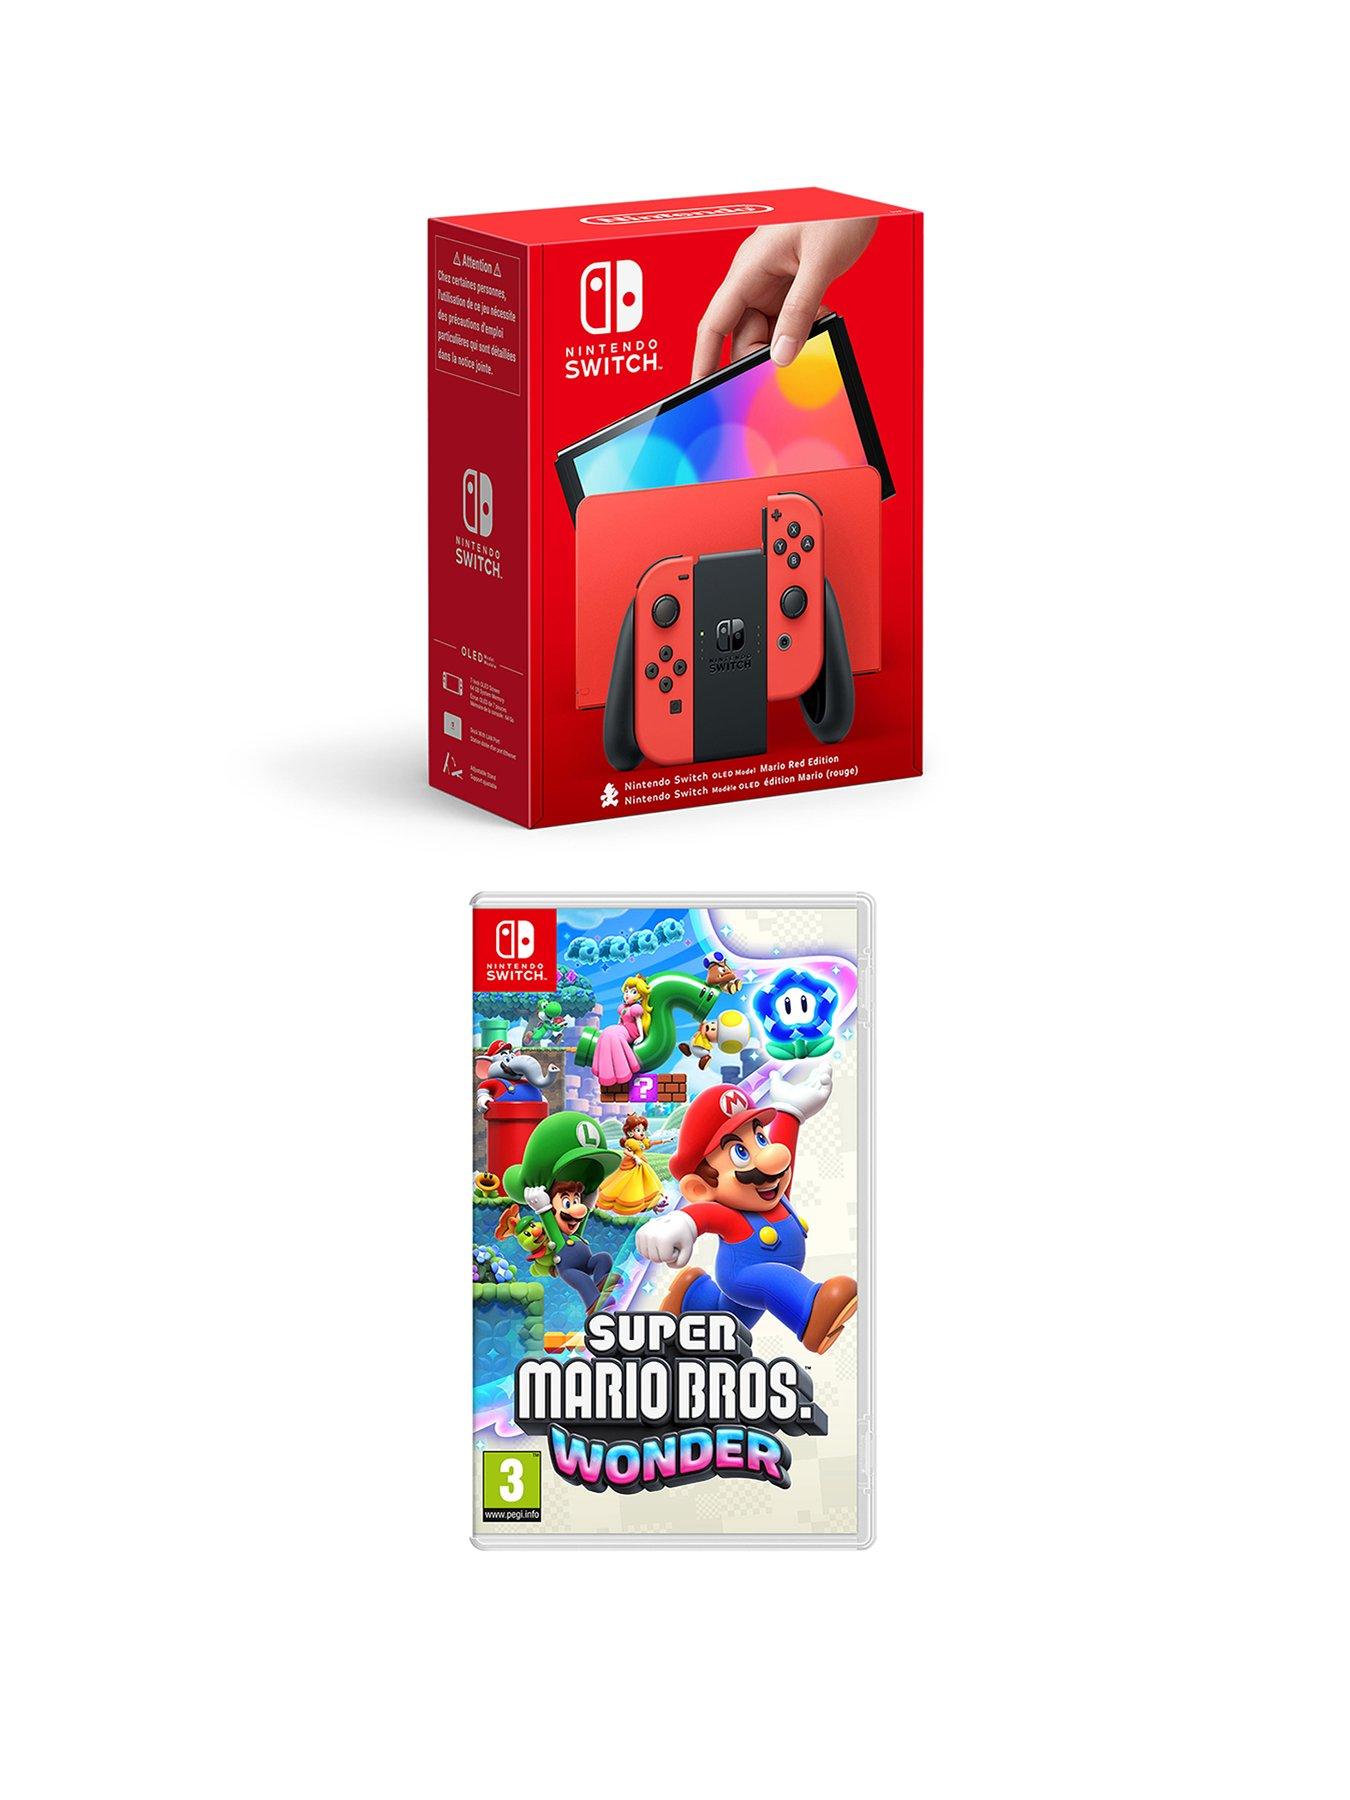 Nintendo Switch OLED, Mario Red Edition